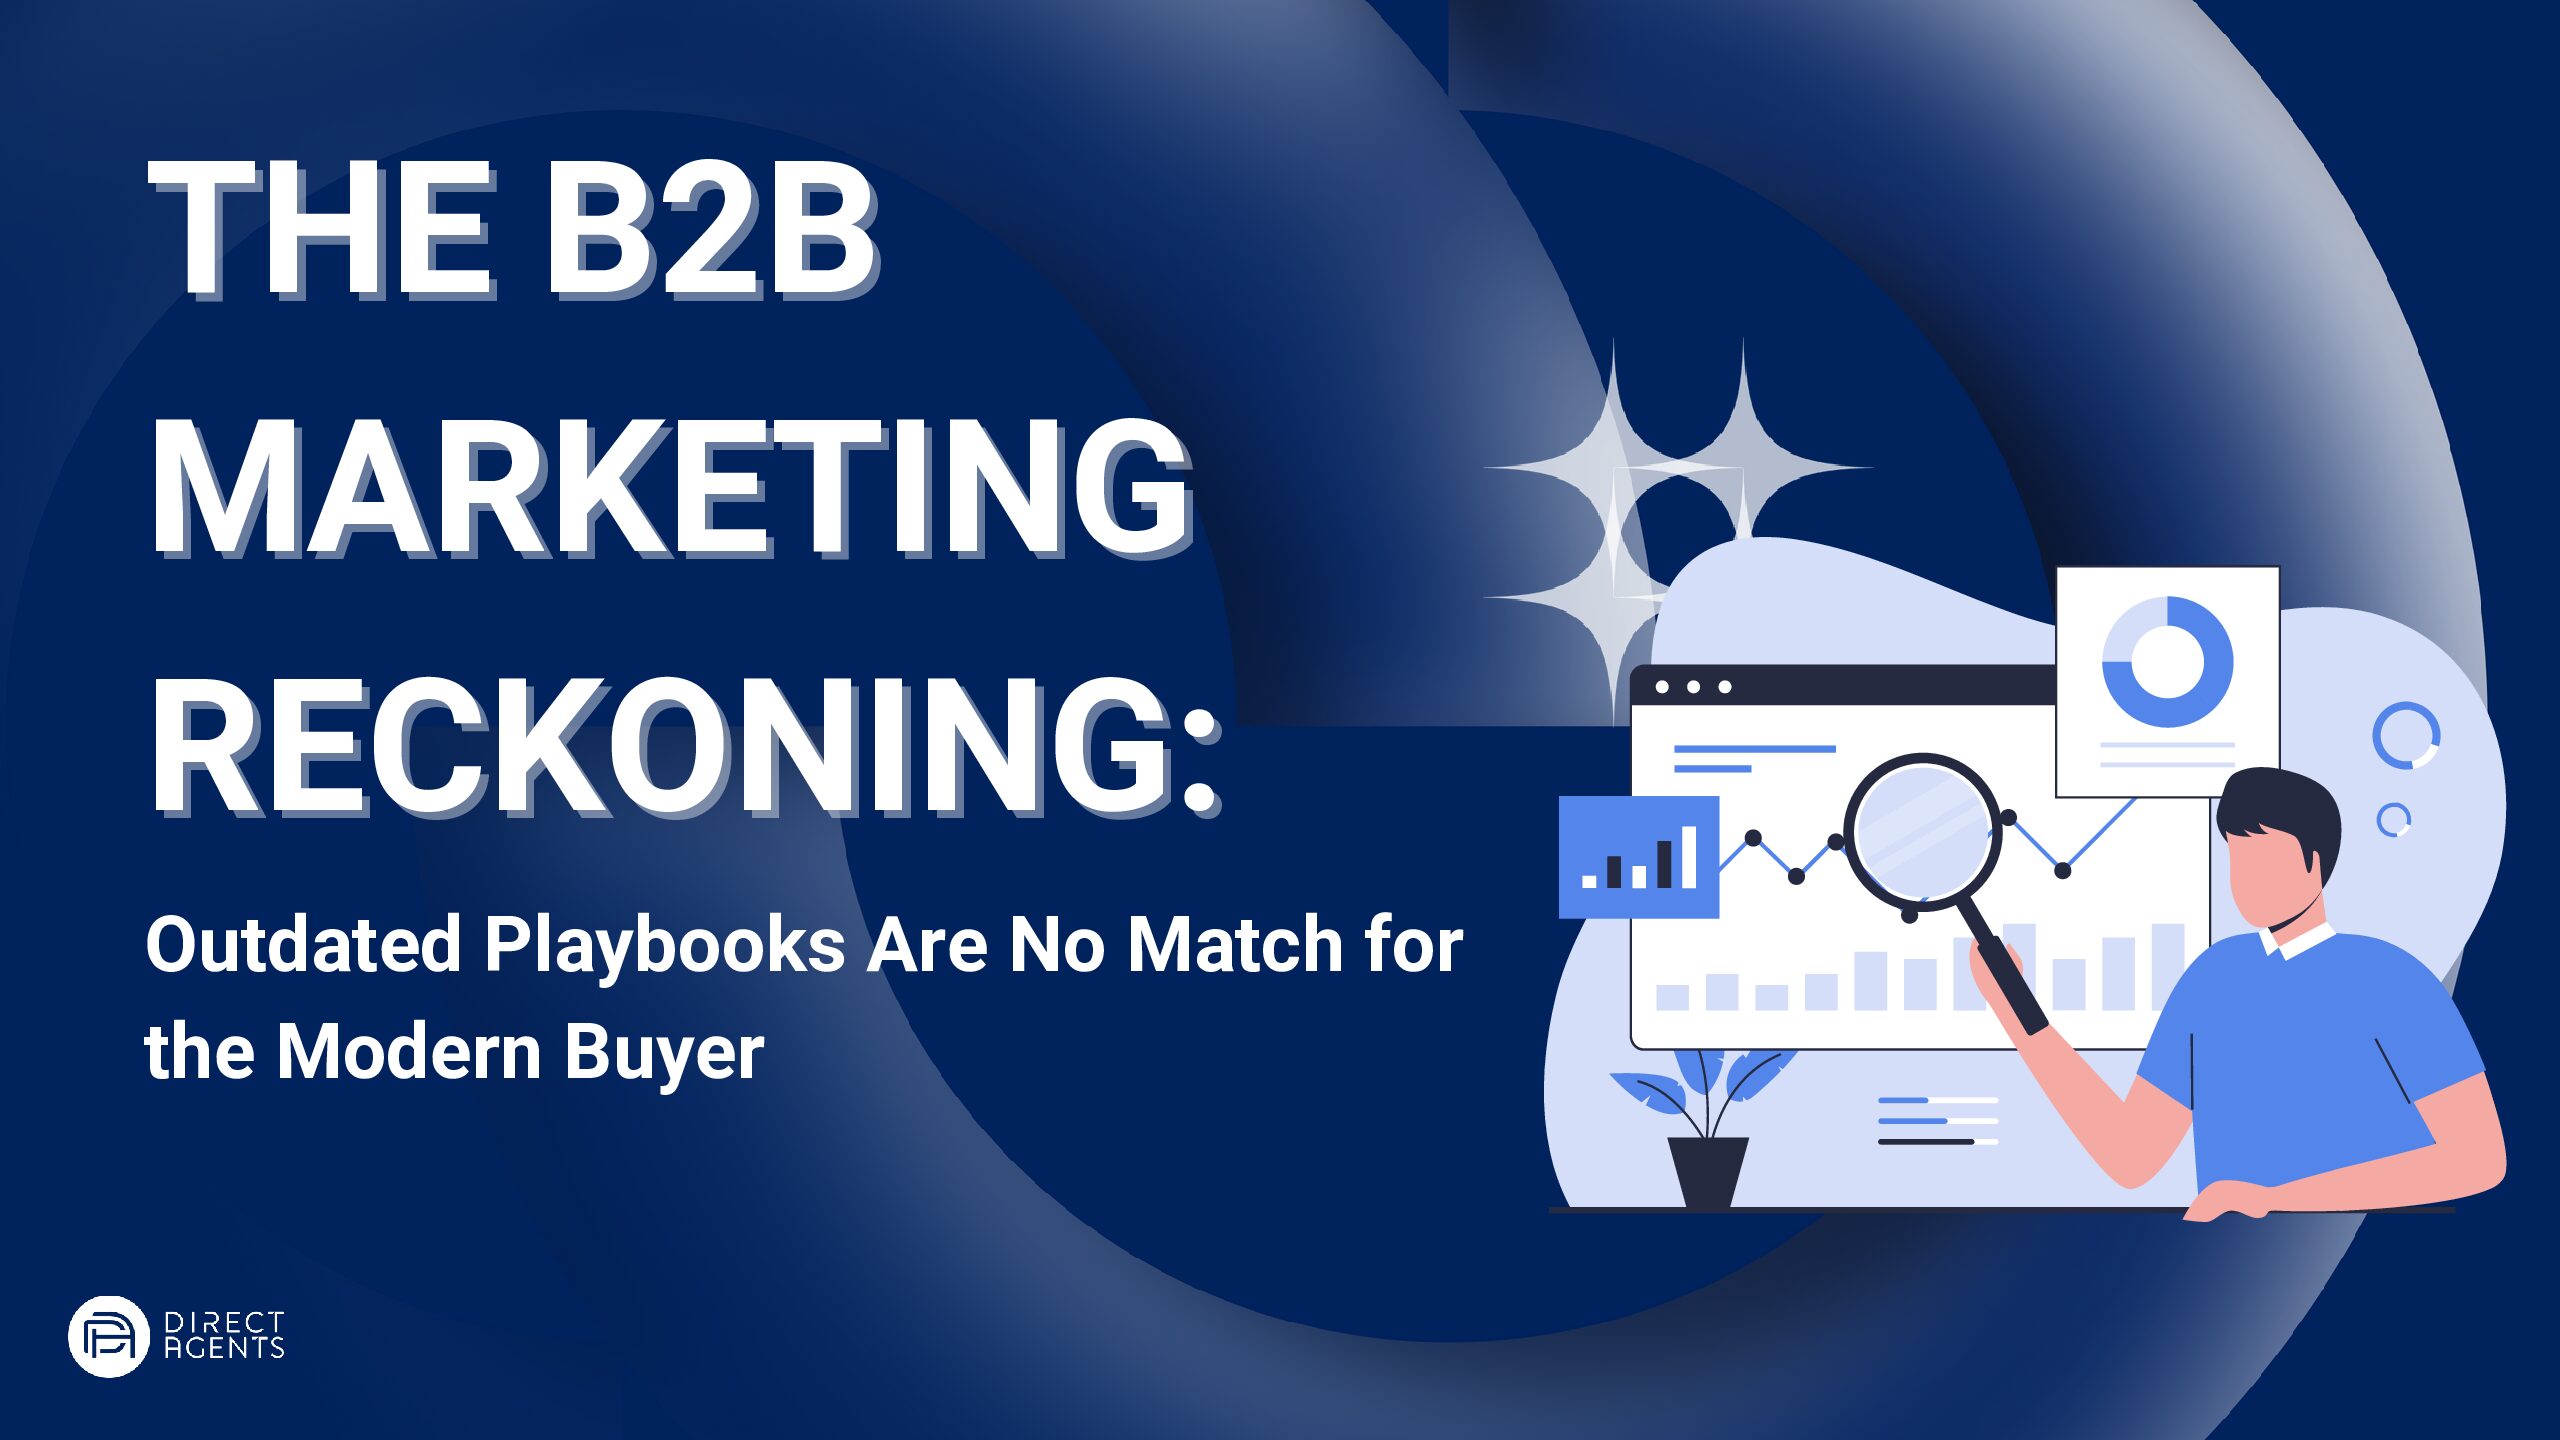 The B2B Marketing Reckoning: Outdated Playbooks Are No Match for the Modern Buyer